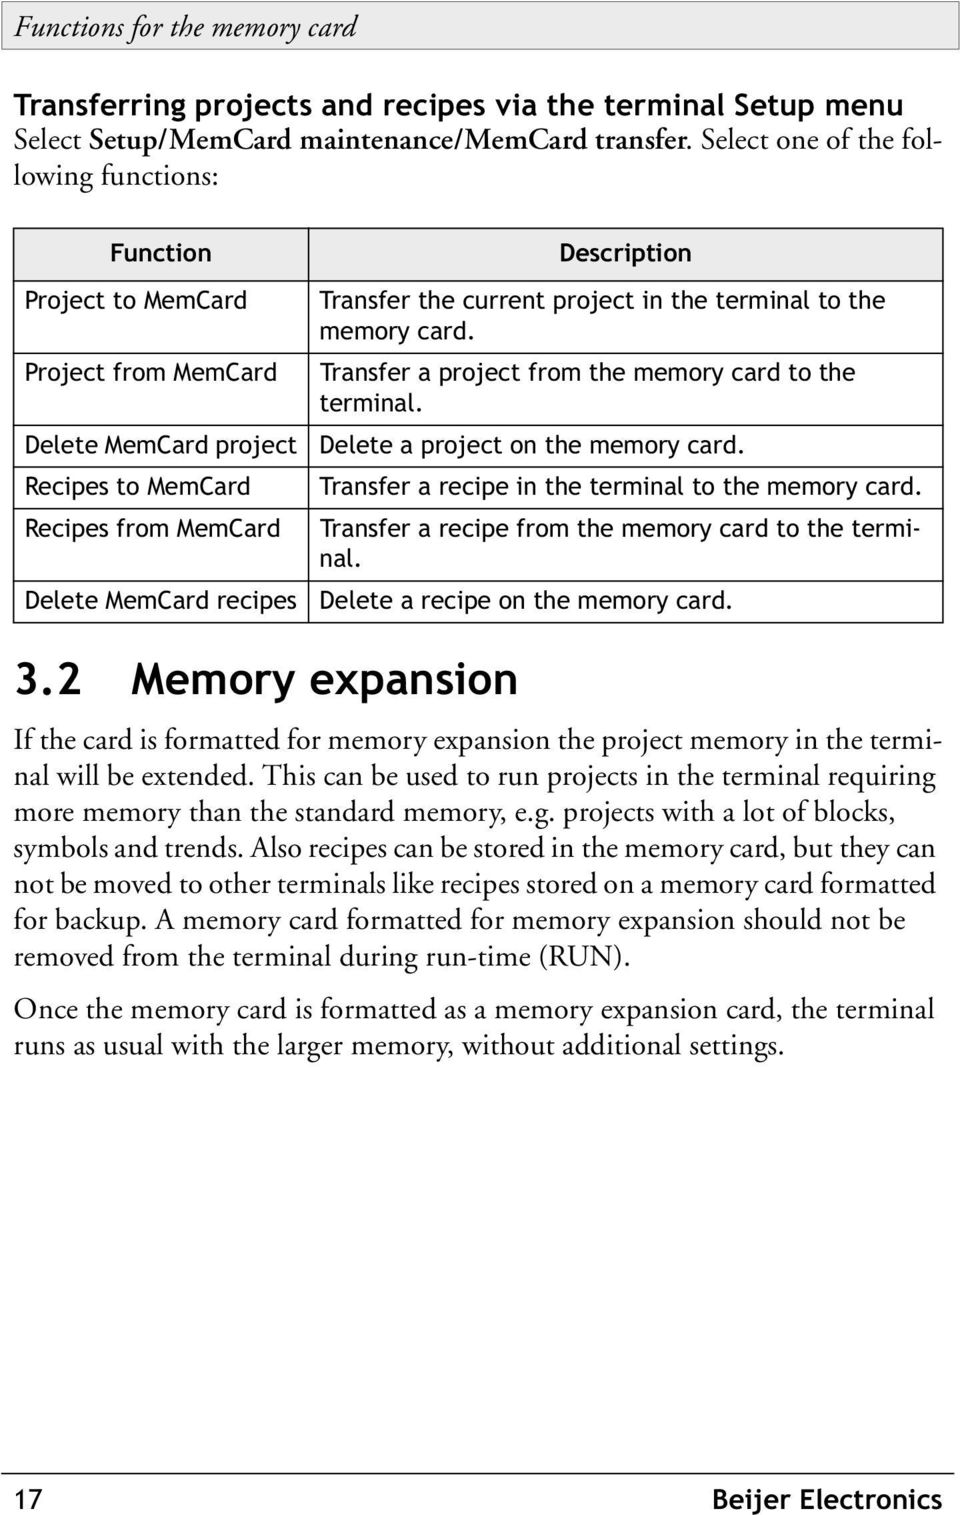 current project in the terminal to the memory card. Transfer a project from the memory card to the terminal. Delete a project on the memory card. Transfer a recipe in the terminal to the memory card.